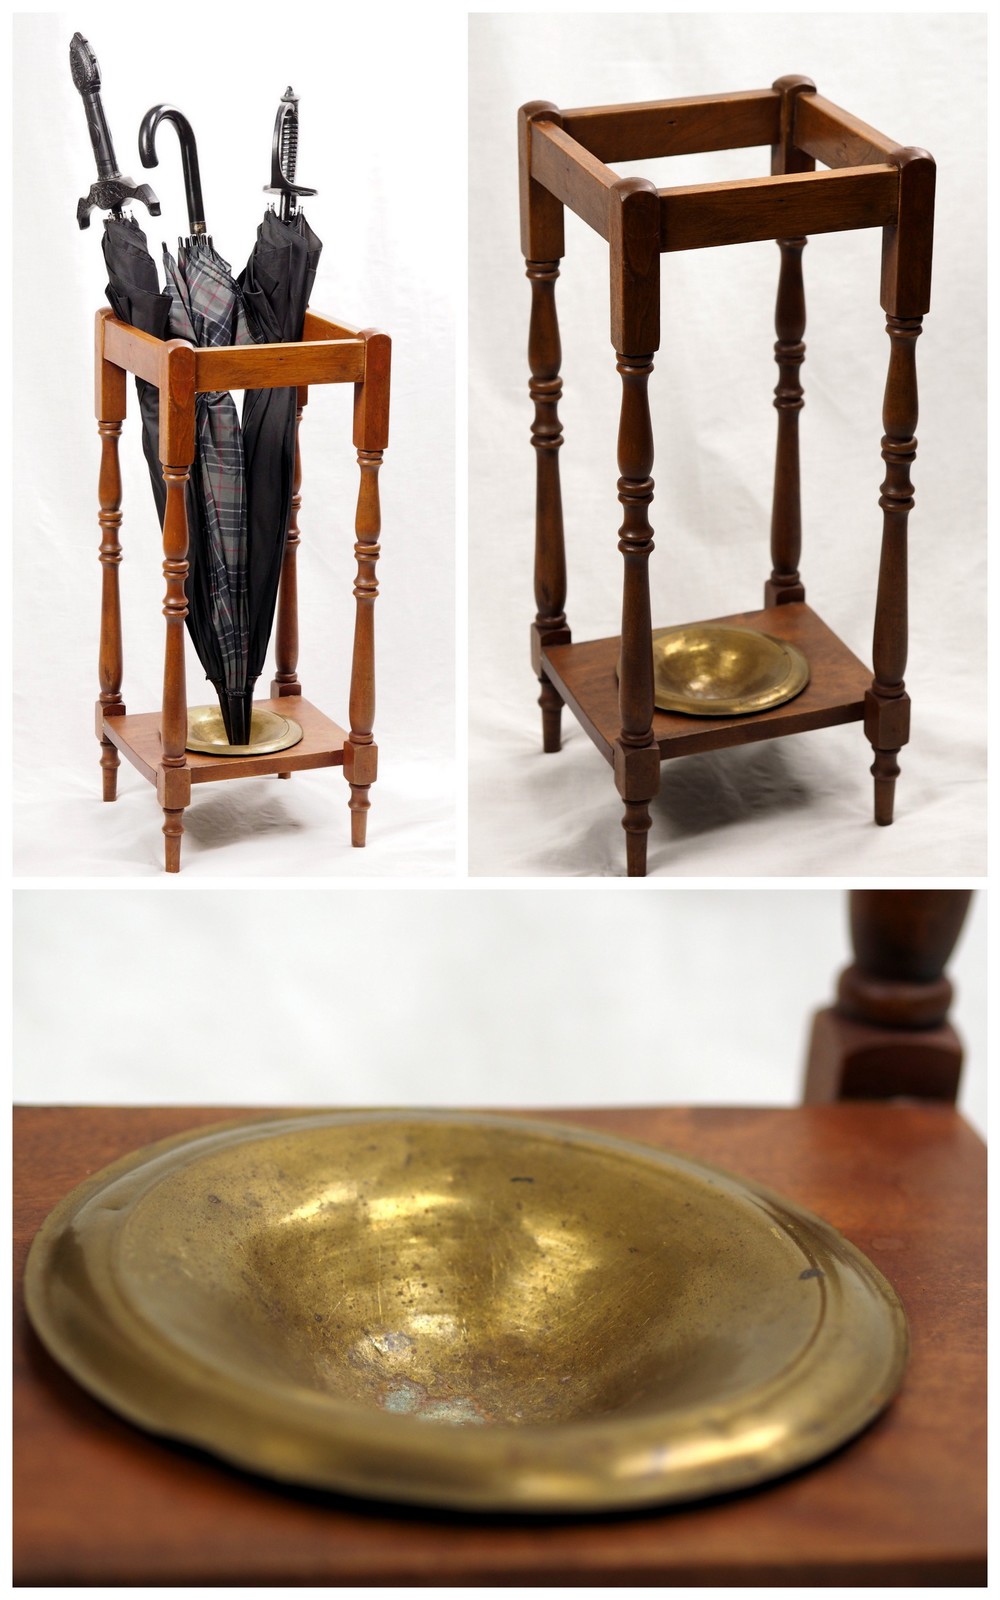 Sold Wowfinds in The Most Elegant and Interesting Antique Wooden Umbrella Stand for Home